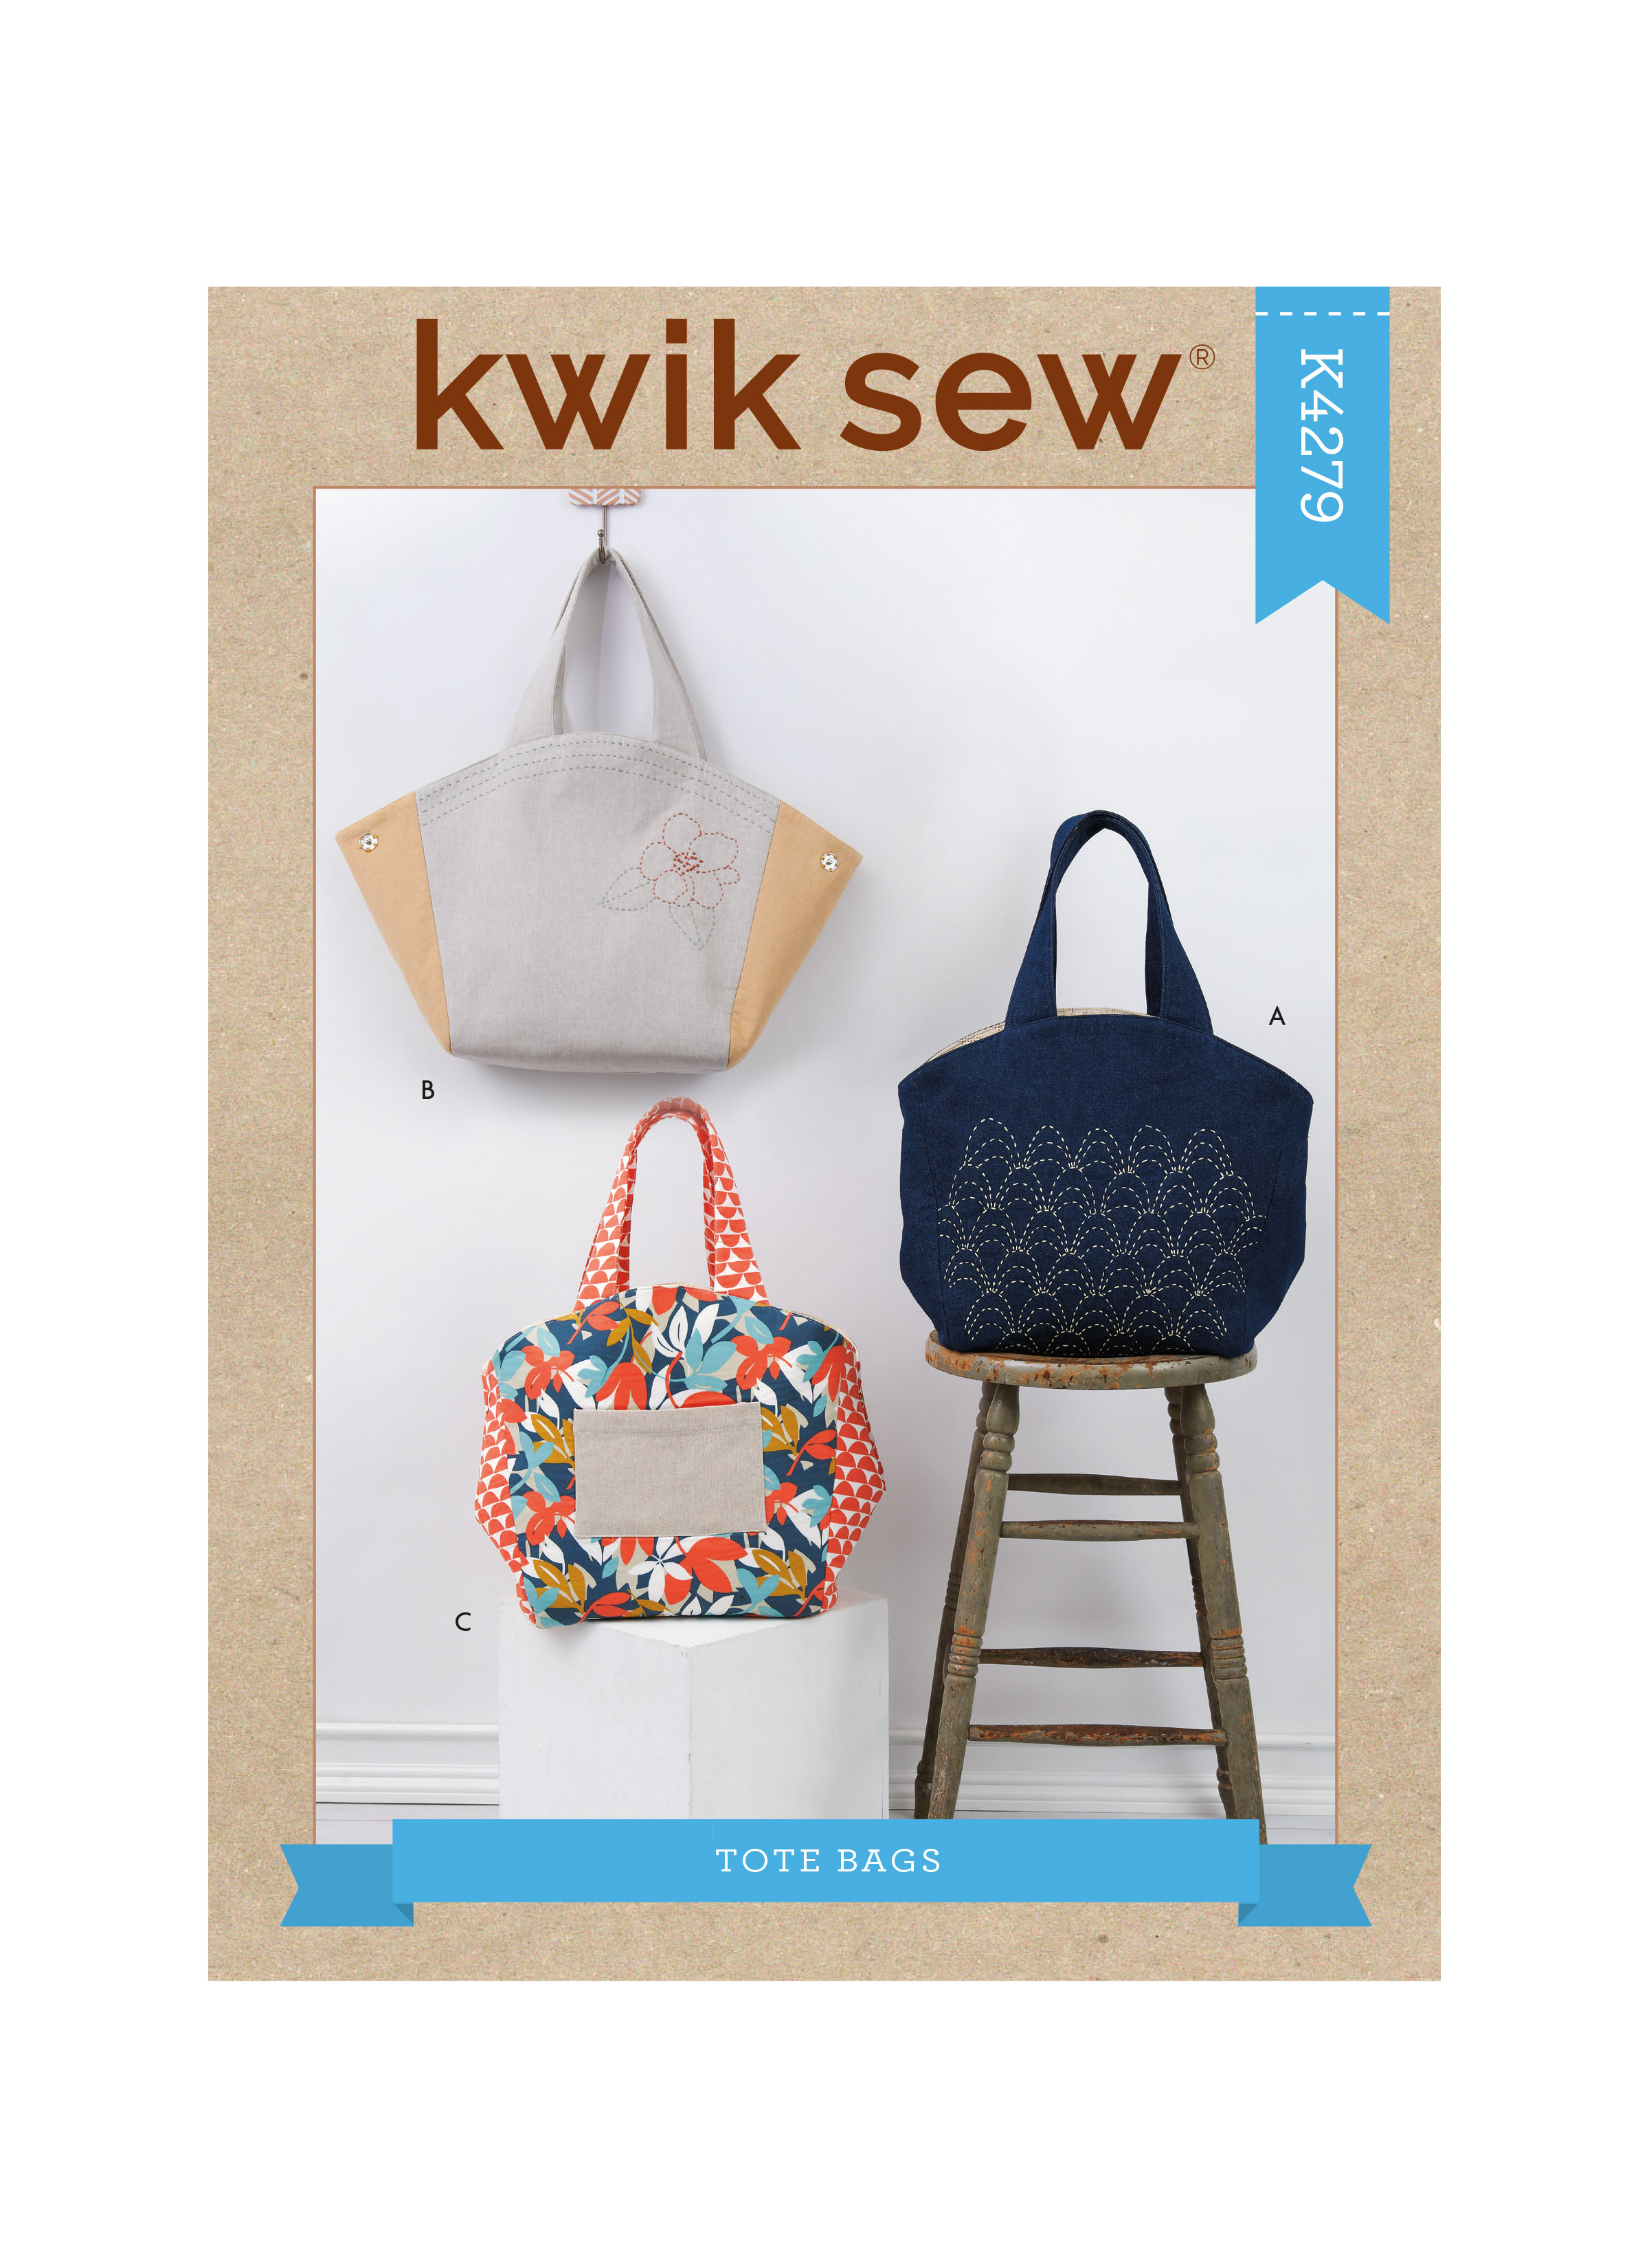 New York Tote Bag Sewing Pattern – Accessories Sewing Patterns